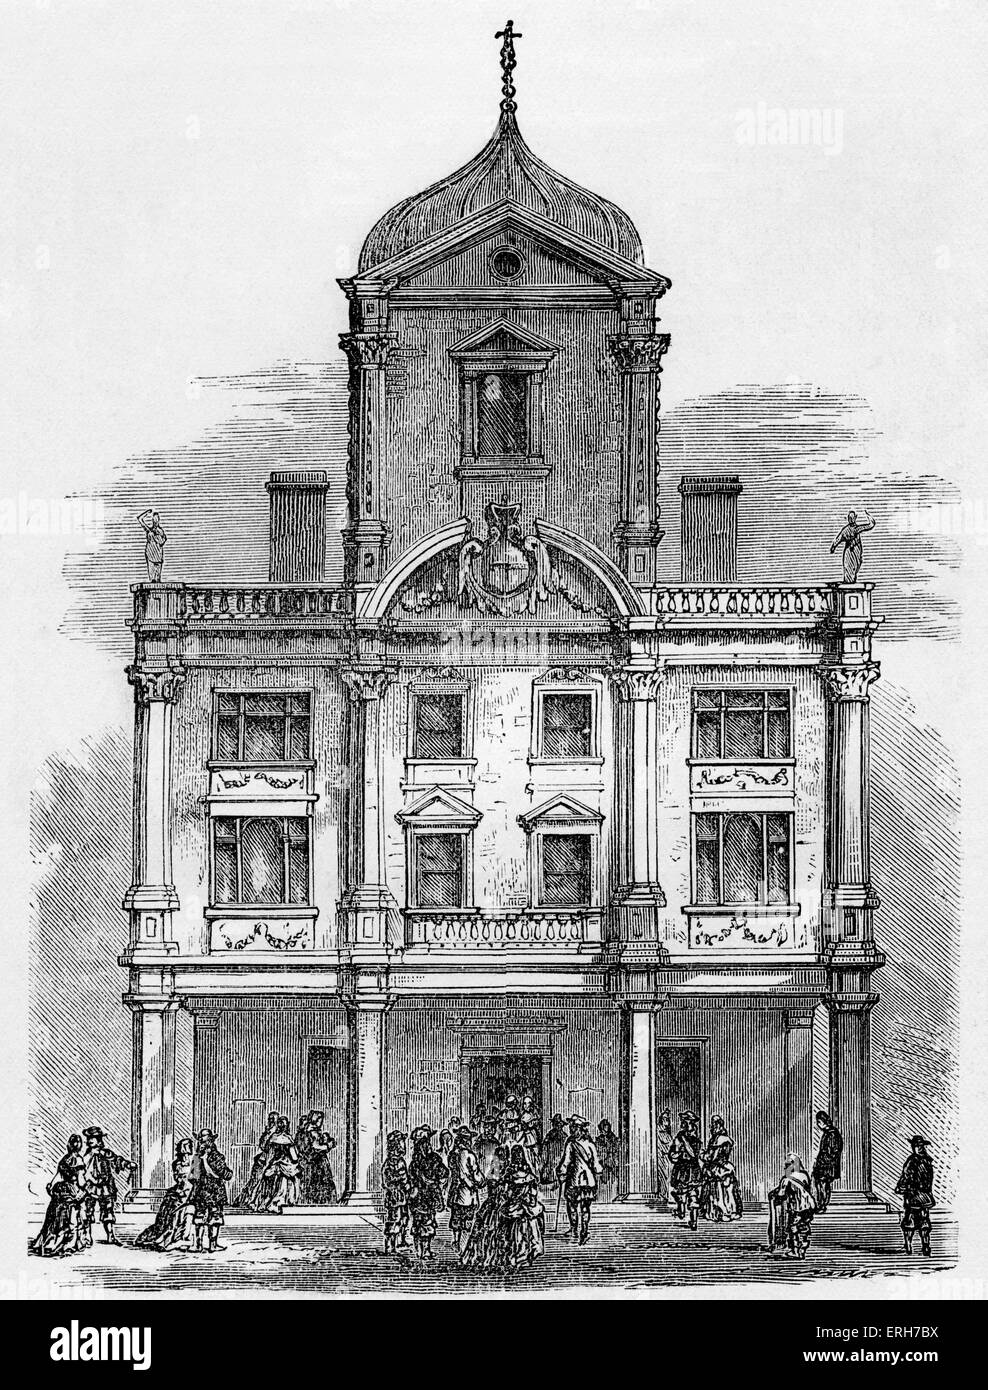 Duke's Theatre, Dorset Gardens, Whitefriars, London with audience outside. The old Queen's Theatre in Dorset Gardens, in which Stock Photo